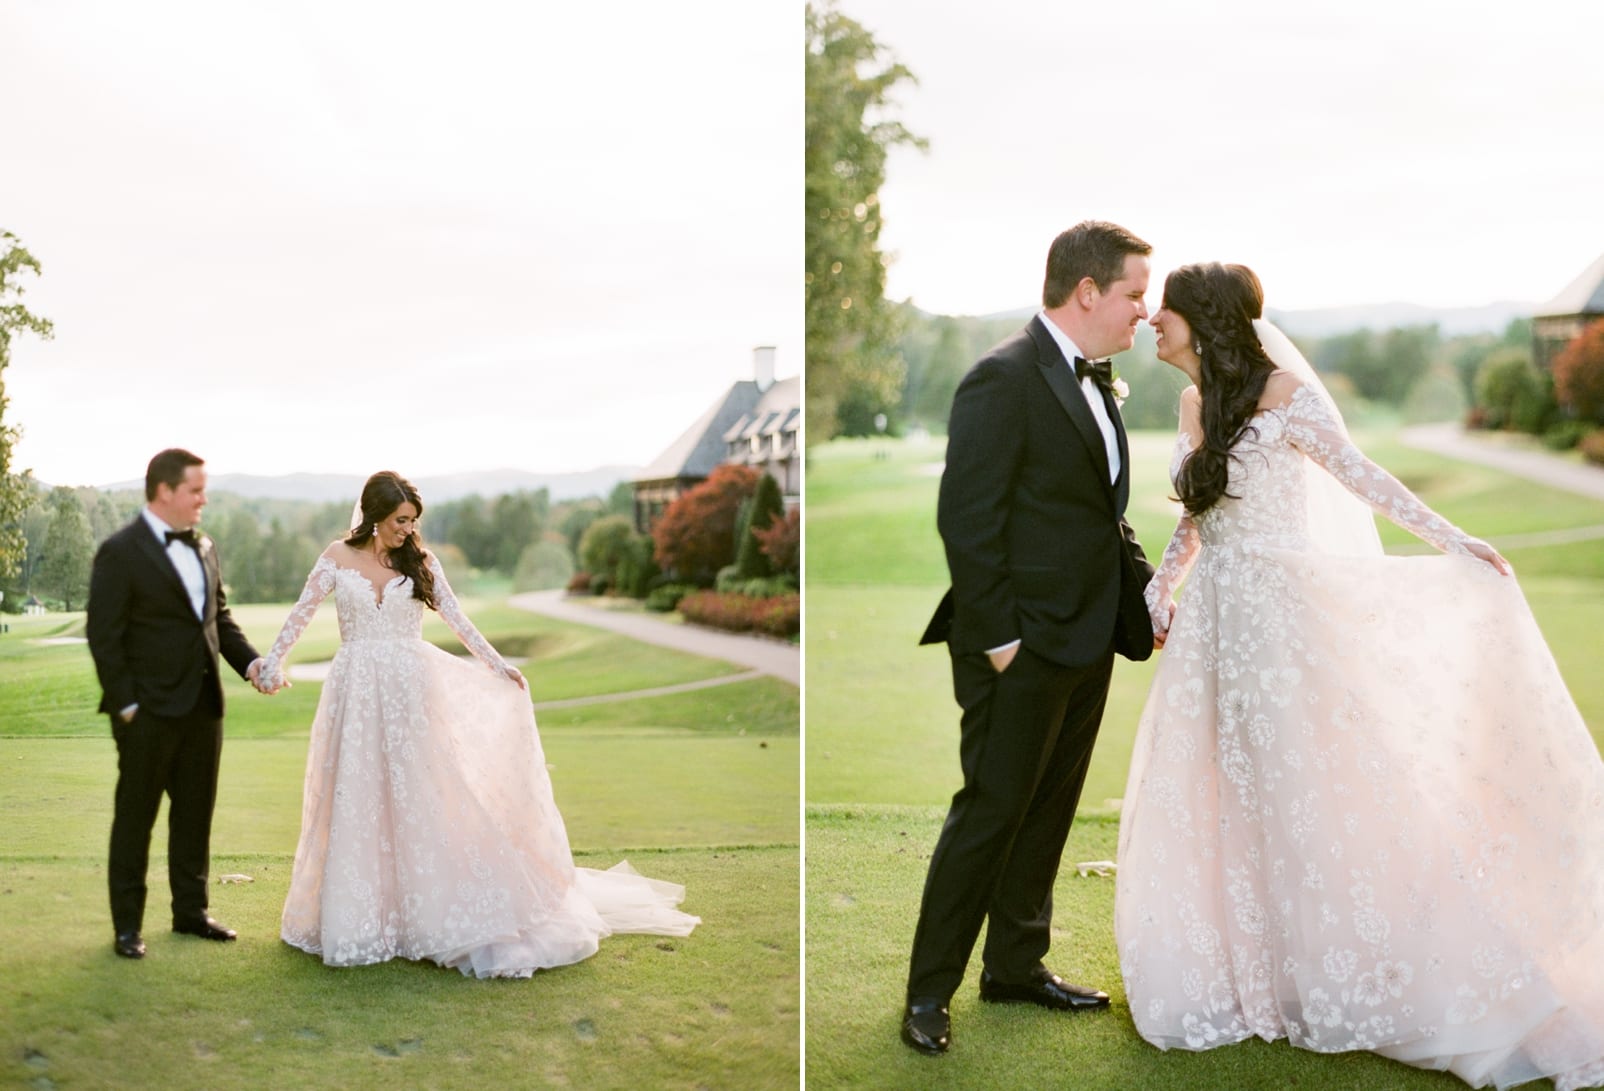 Asheville, NC bride and groom sunset portraits on a golf course photo